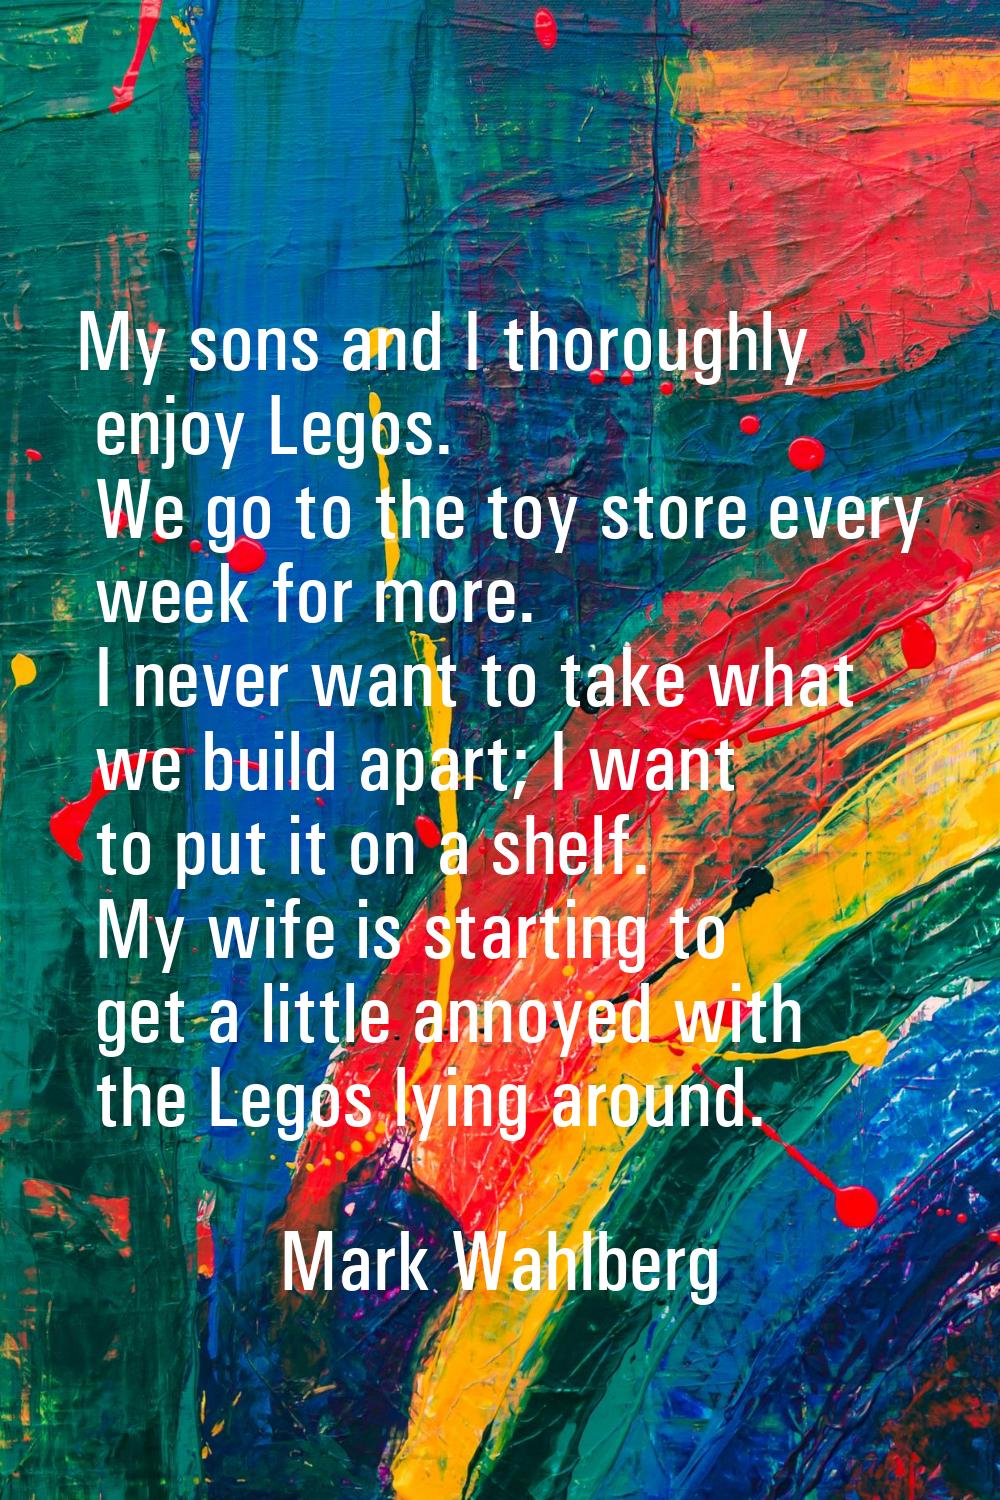 My sons and I thoroughly enjoy Legos. We go to the toy store every week for more. I never want to t